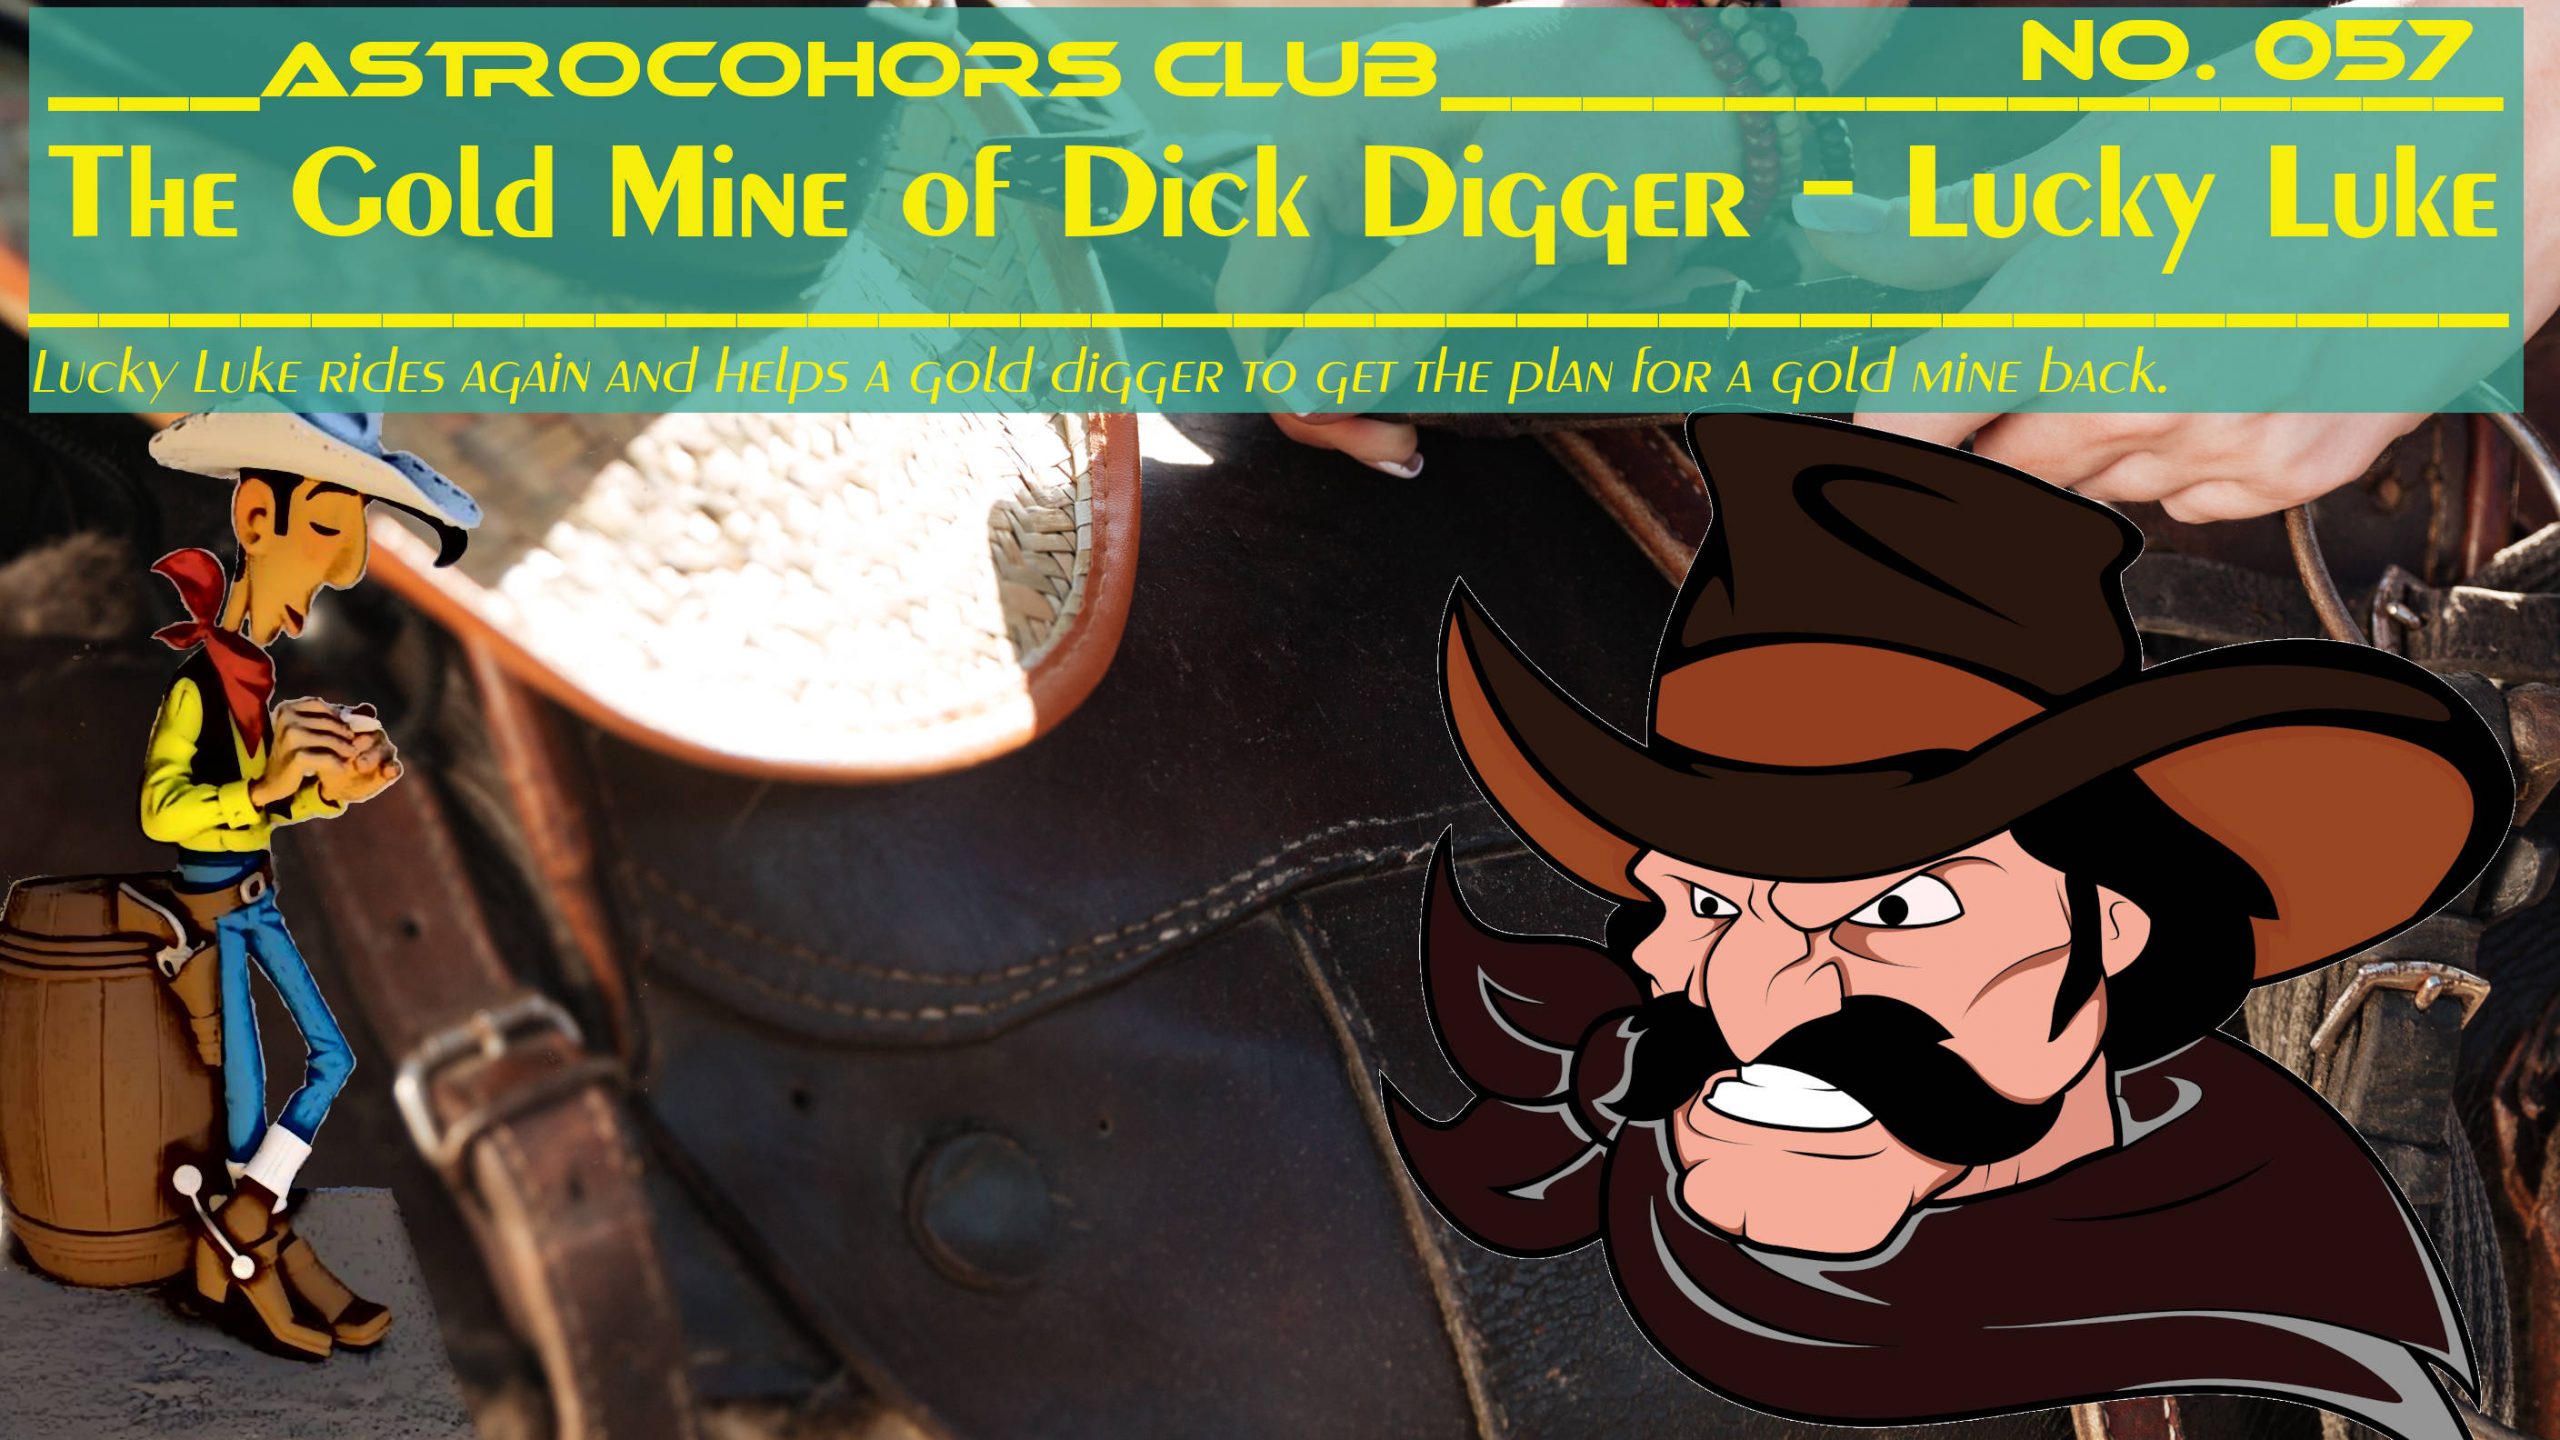 The Gold Mine of Dick Digger [Lucky Luke] | ACC #057